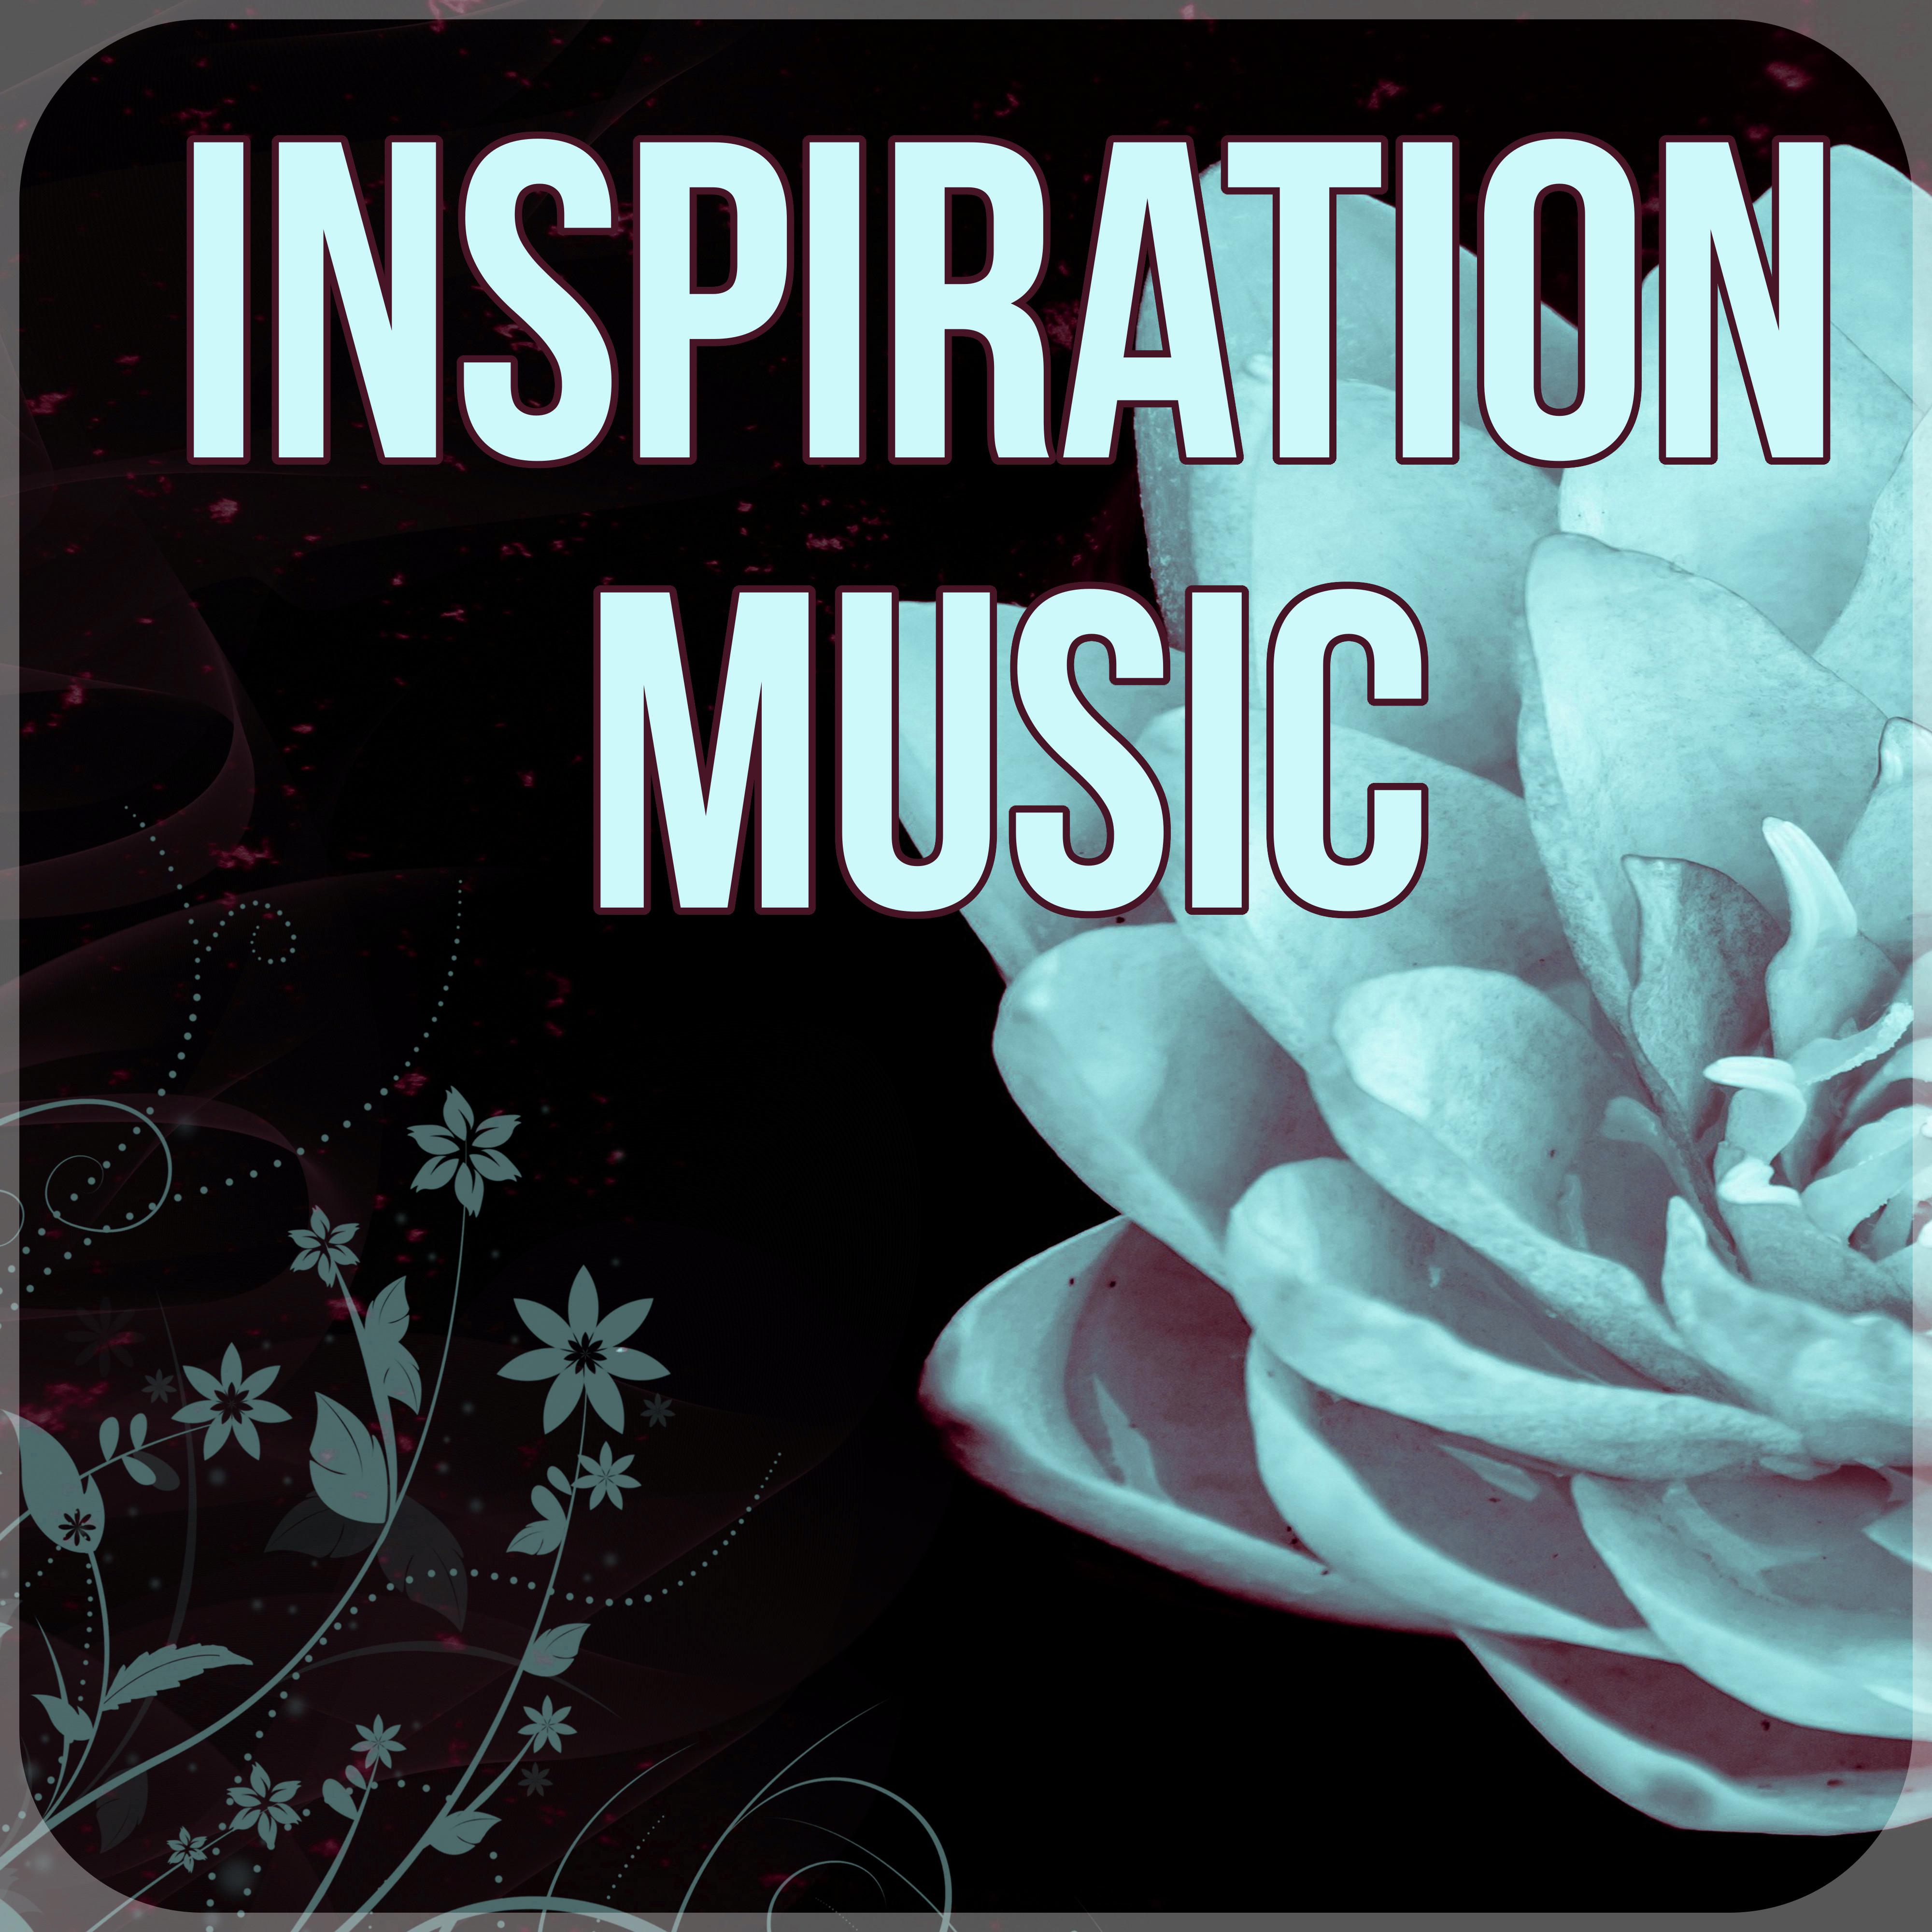 Inspiration Music - Peaceful Music with the Sounds of Nature, Soothing Chill Out Music for Power Yoga